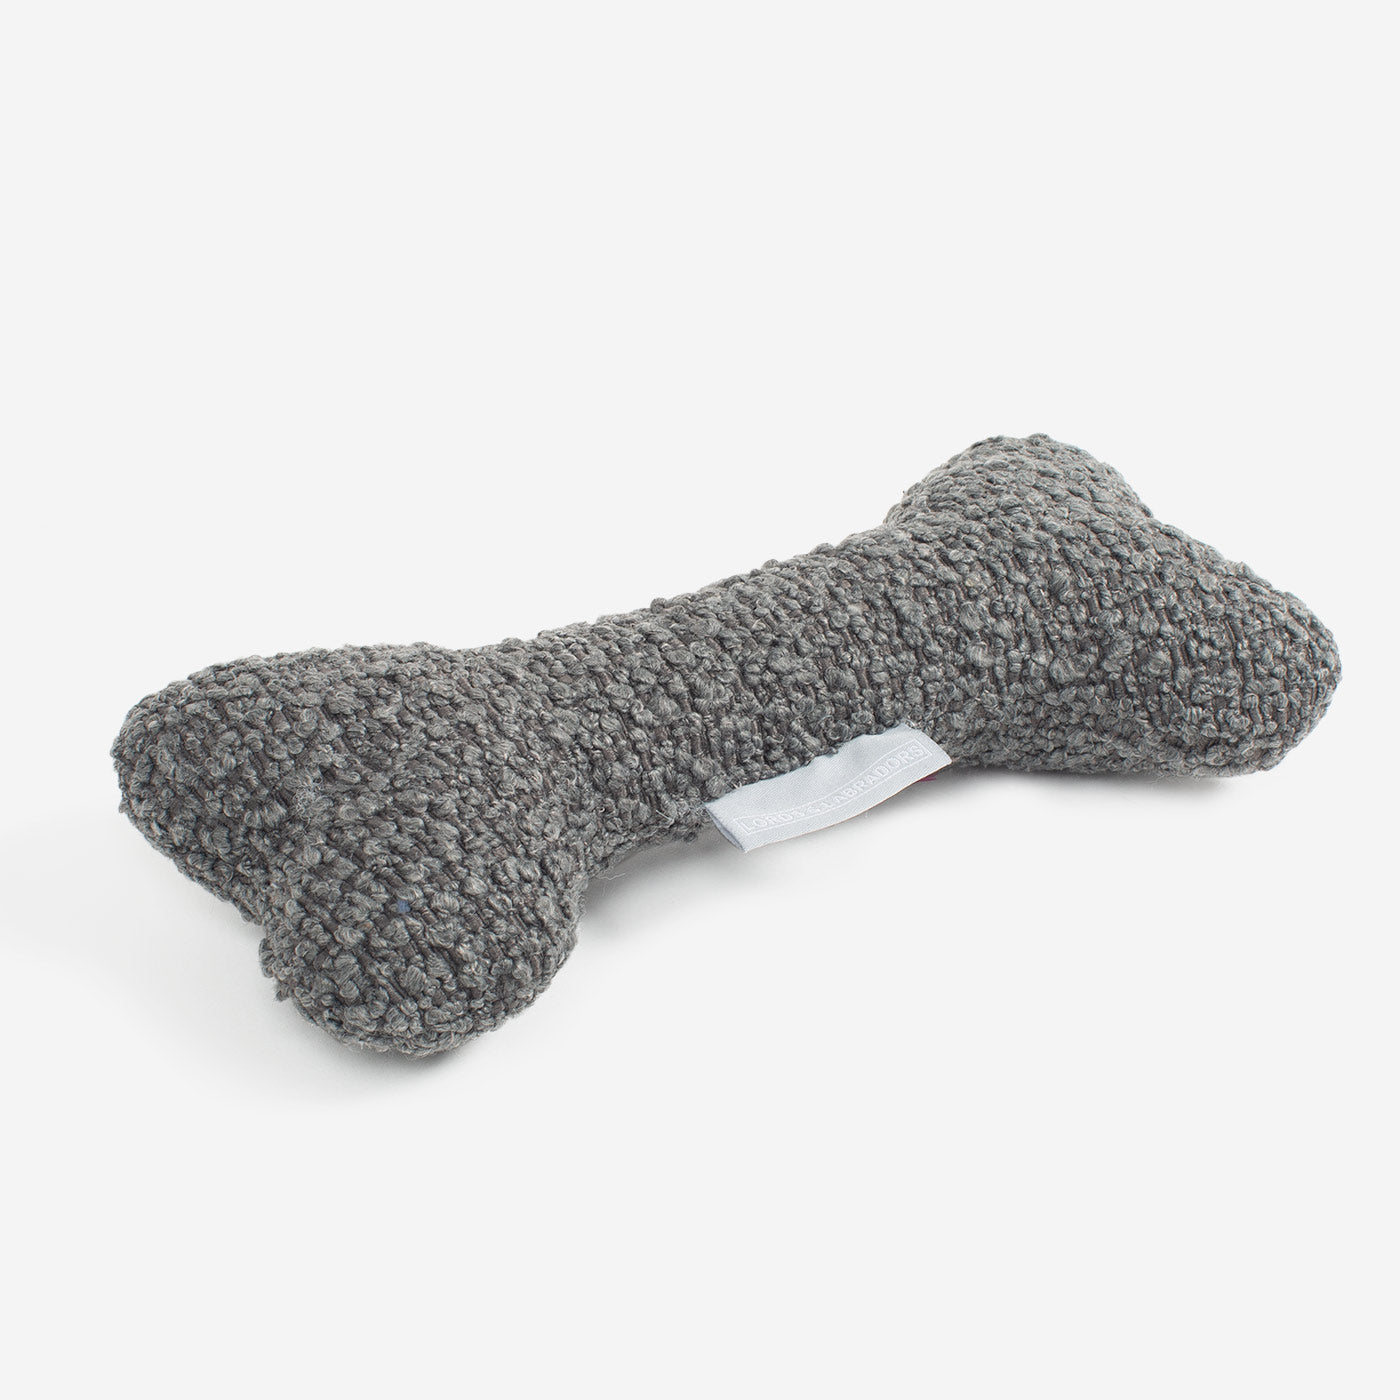 Present The Perfect Pet Playtime With Our Luxury Dog Bone Toy, In Stunning Granite Boucle! Available To Personalise Now at Lords & Labradors    